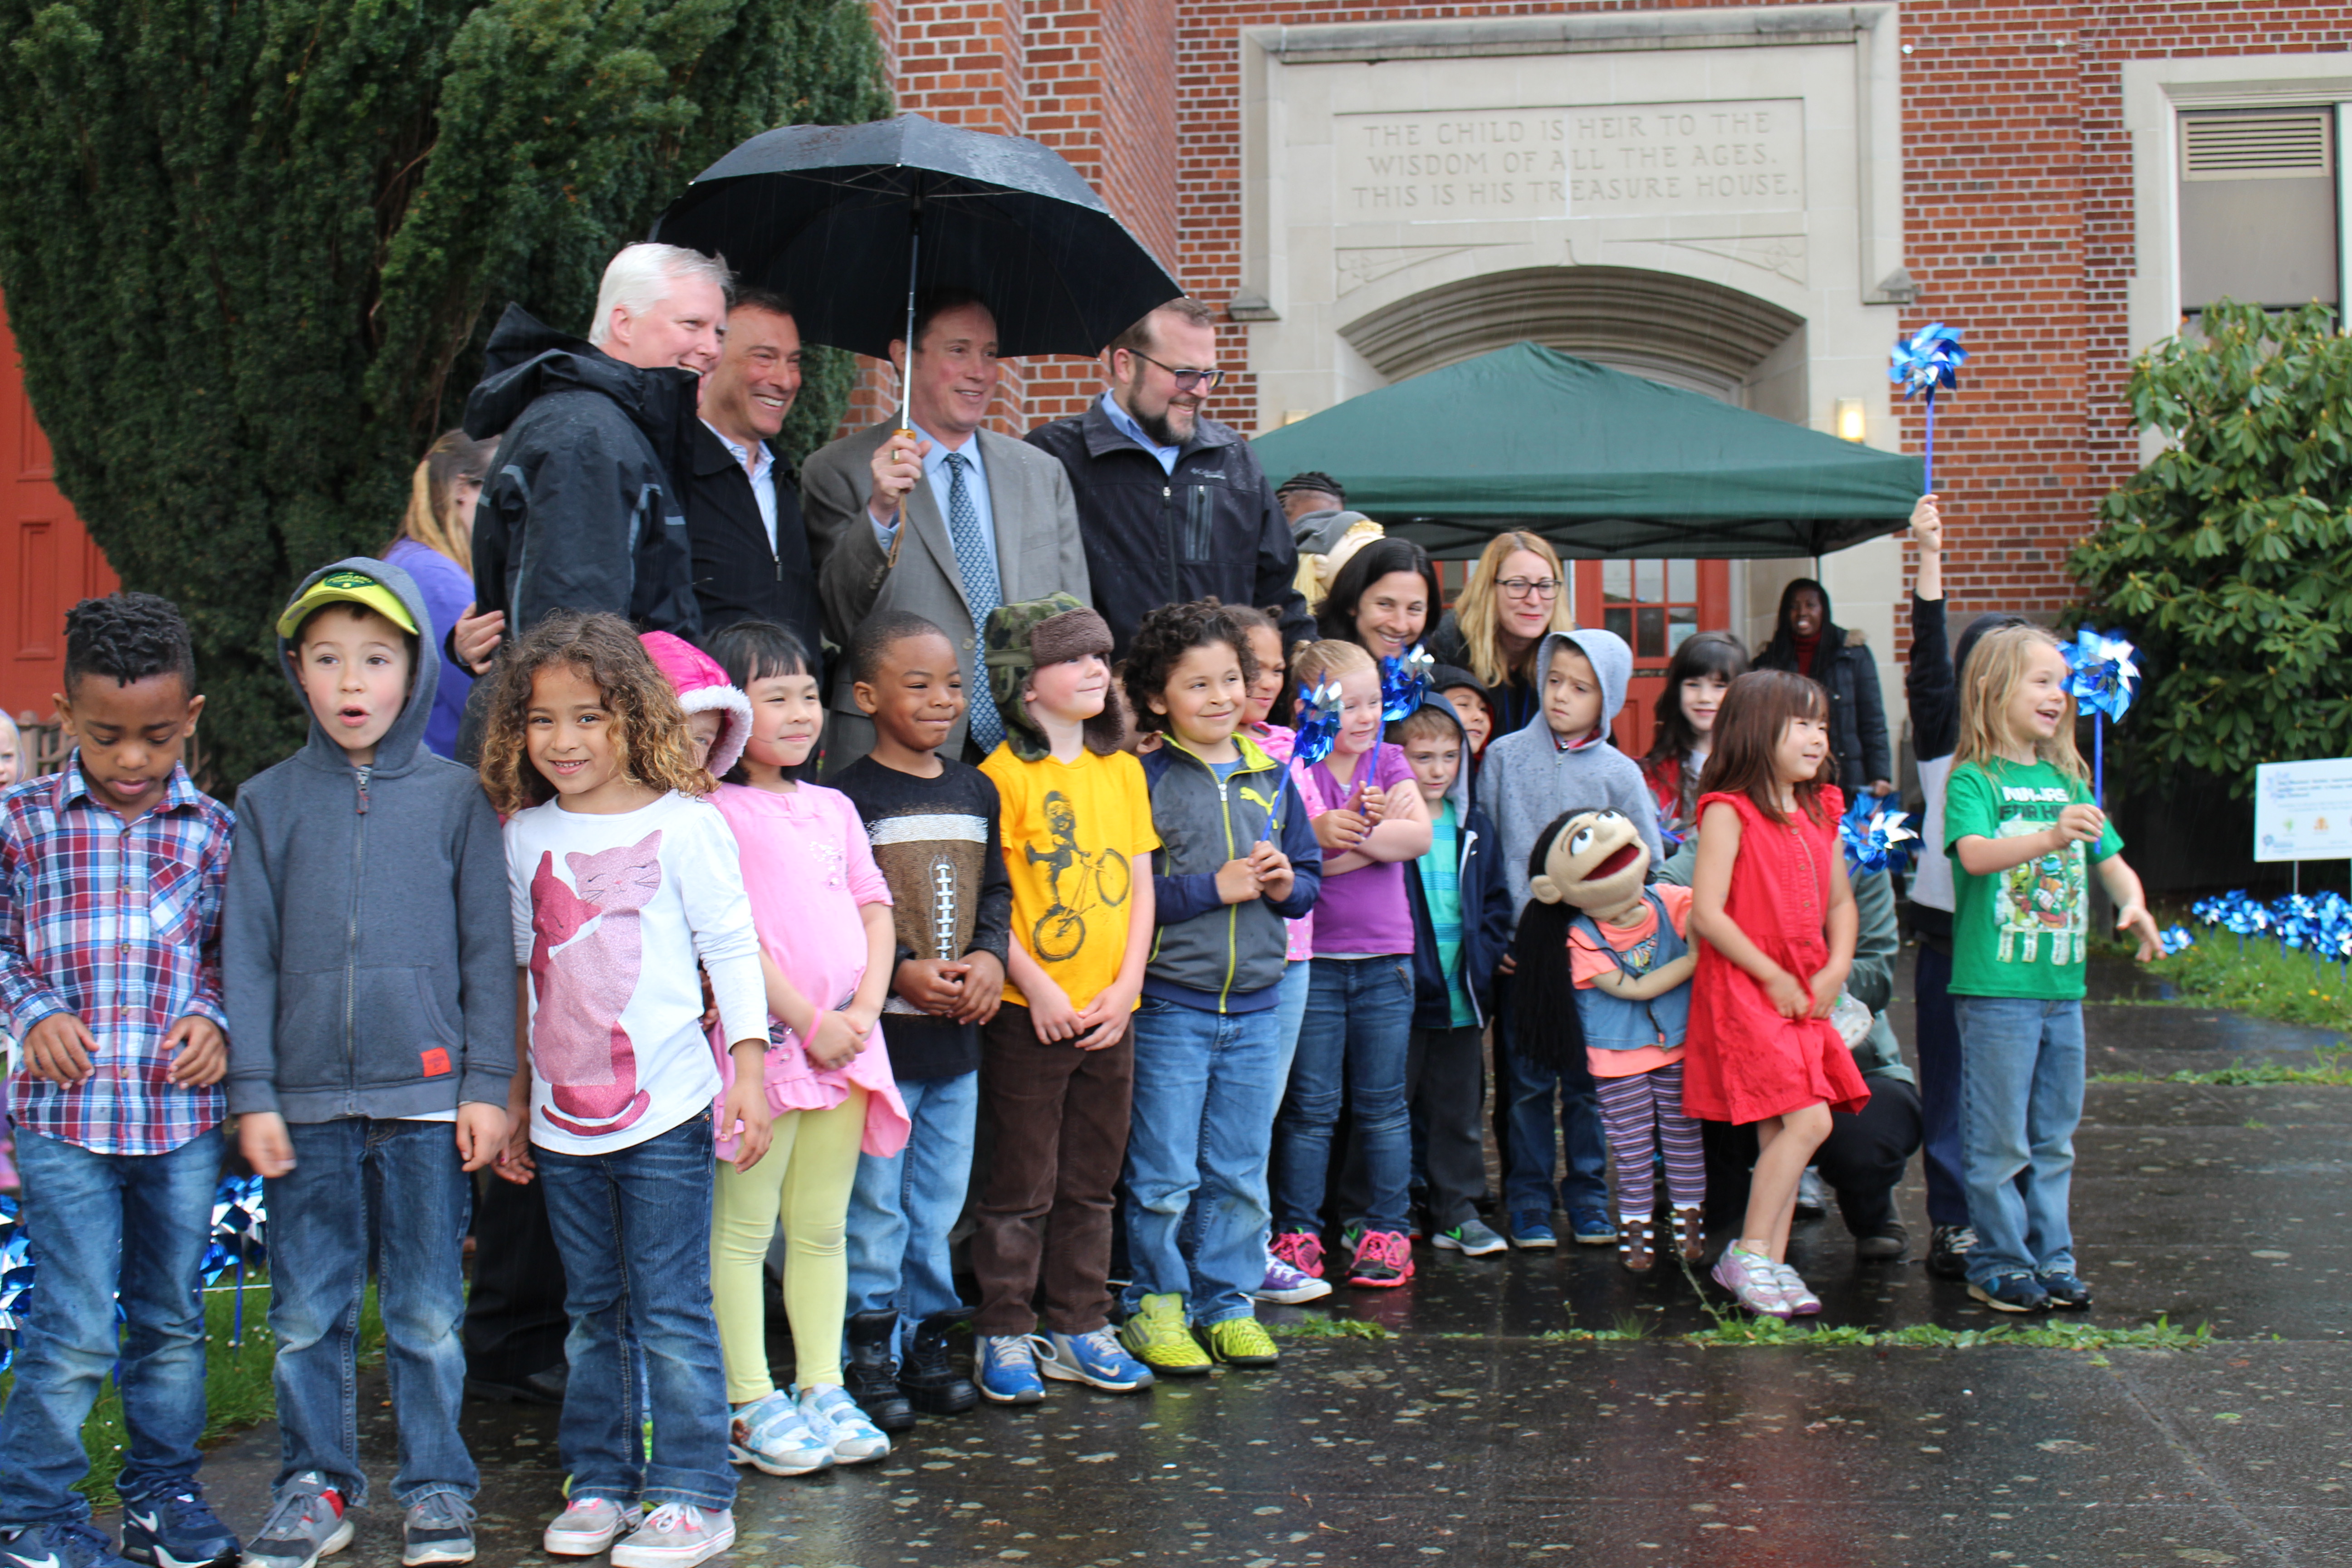 Thank you to everyone who braved the rain this morning to support Pinwheels for Prevention!